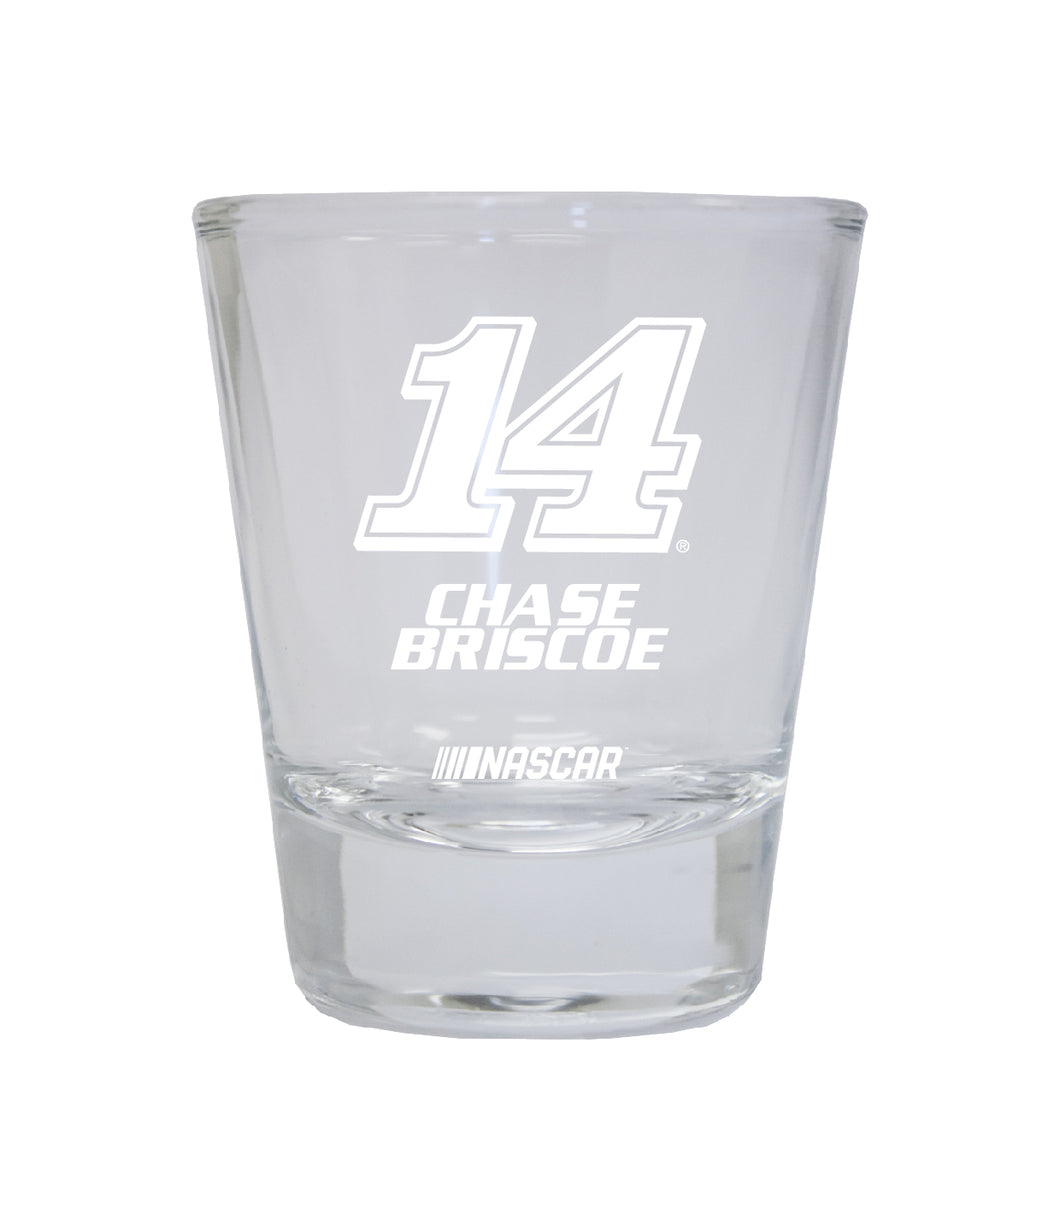 Chase Briscoe #14 Nascar Etched Round Shot Glass New for 2022